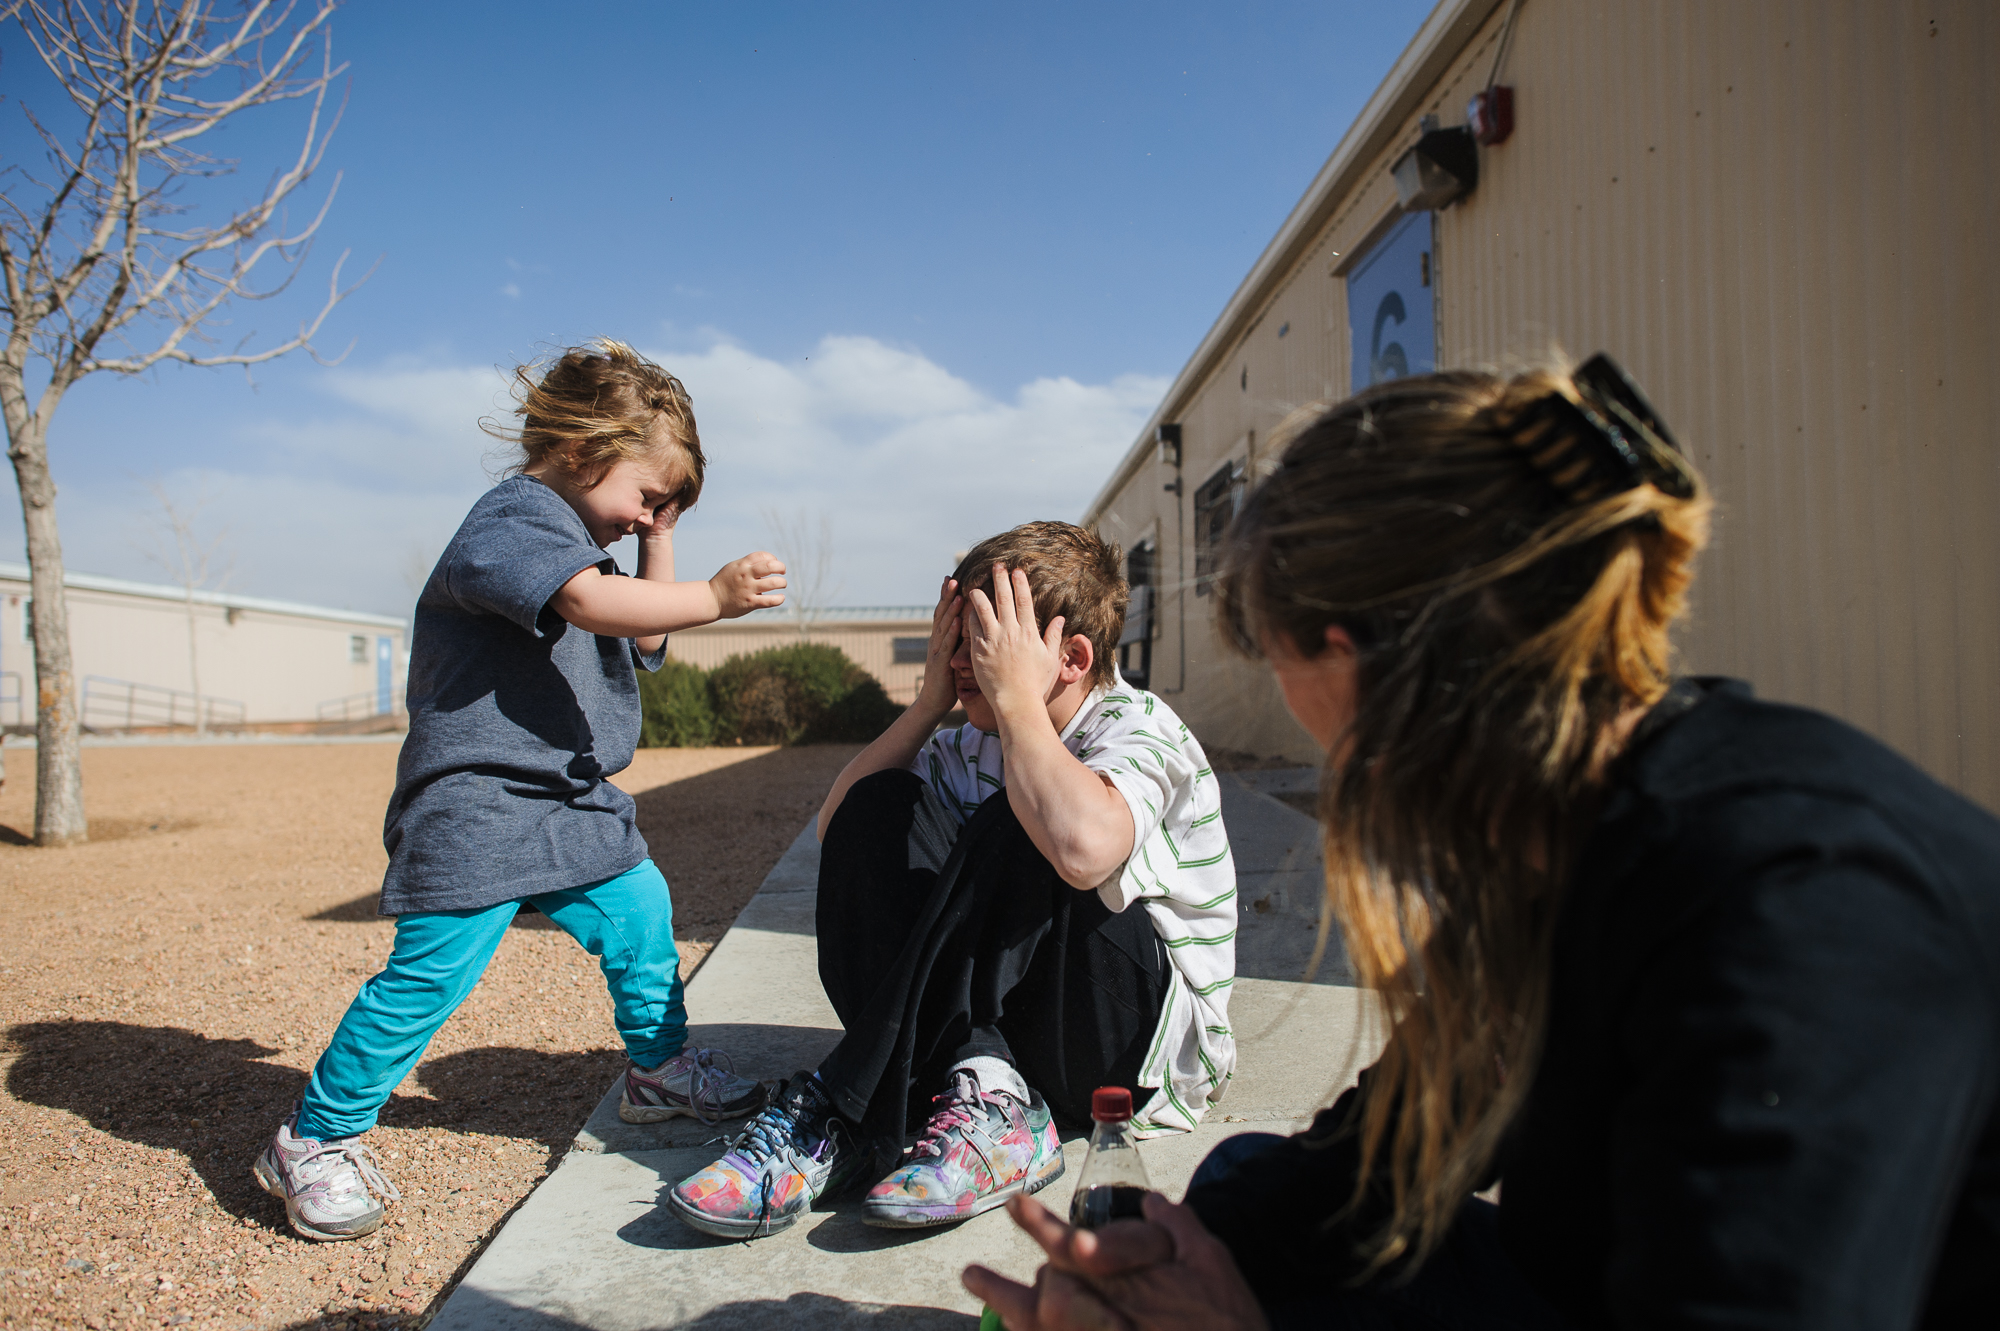  Vinny, age 13, plays a game with his sister, Elycia, age 4, outside the counseling office where he will be evaluated for post traumatic stress, 2012. 